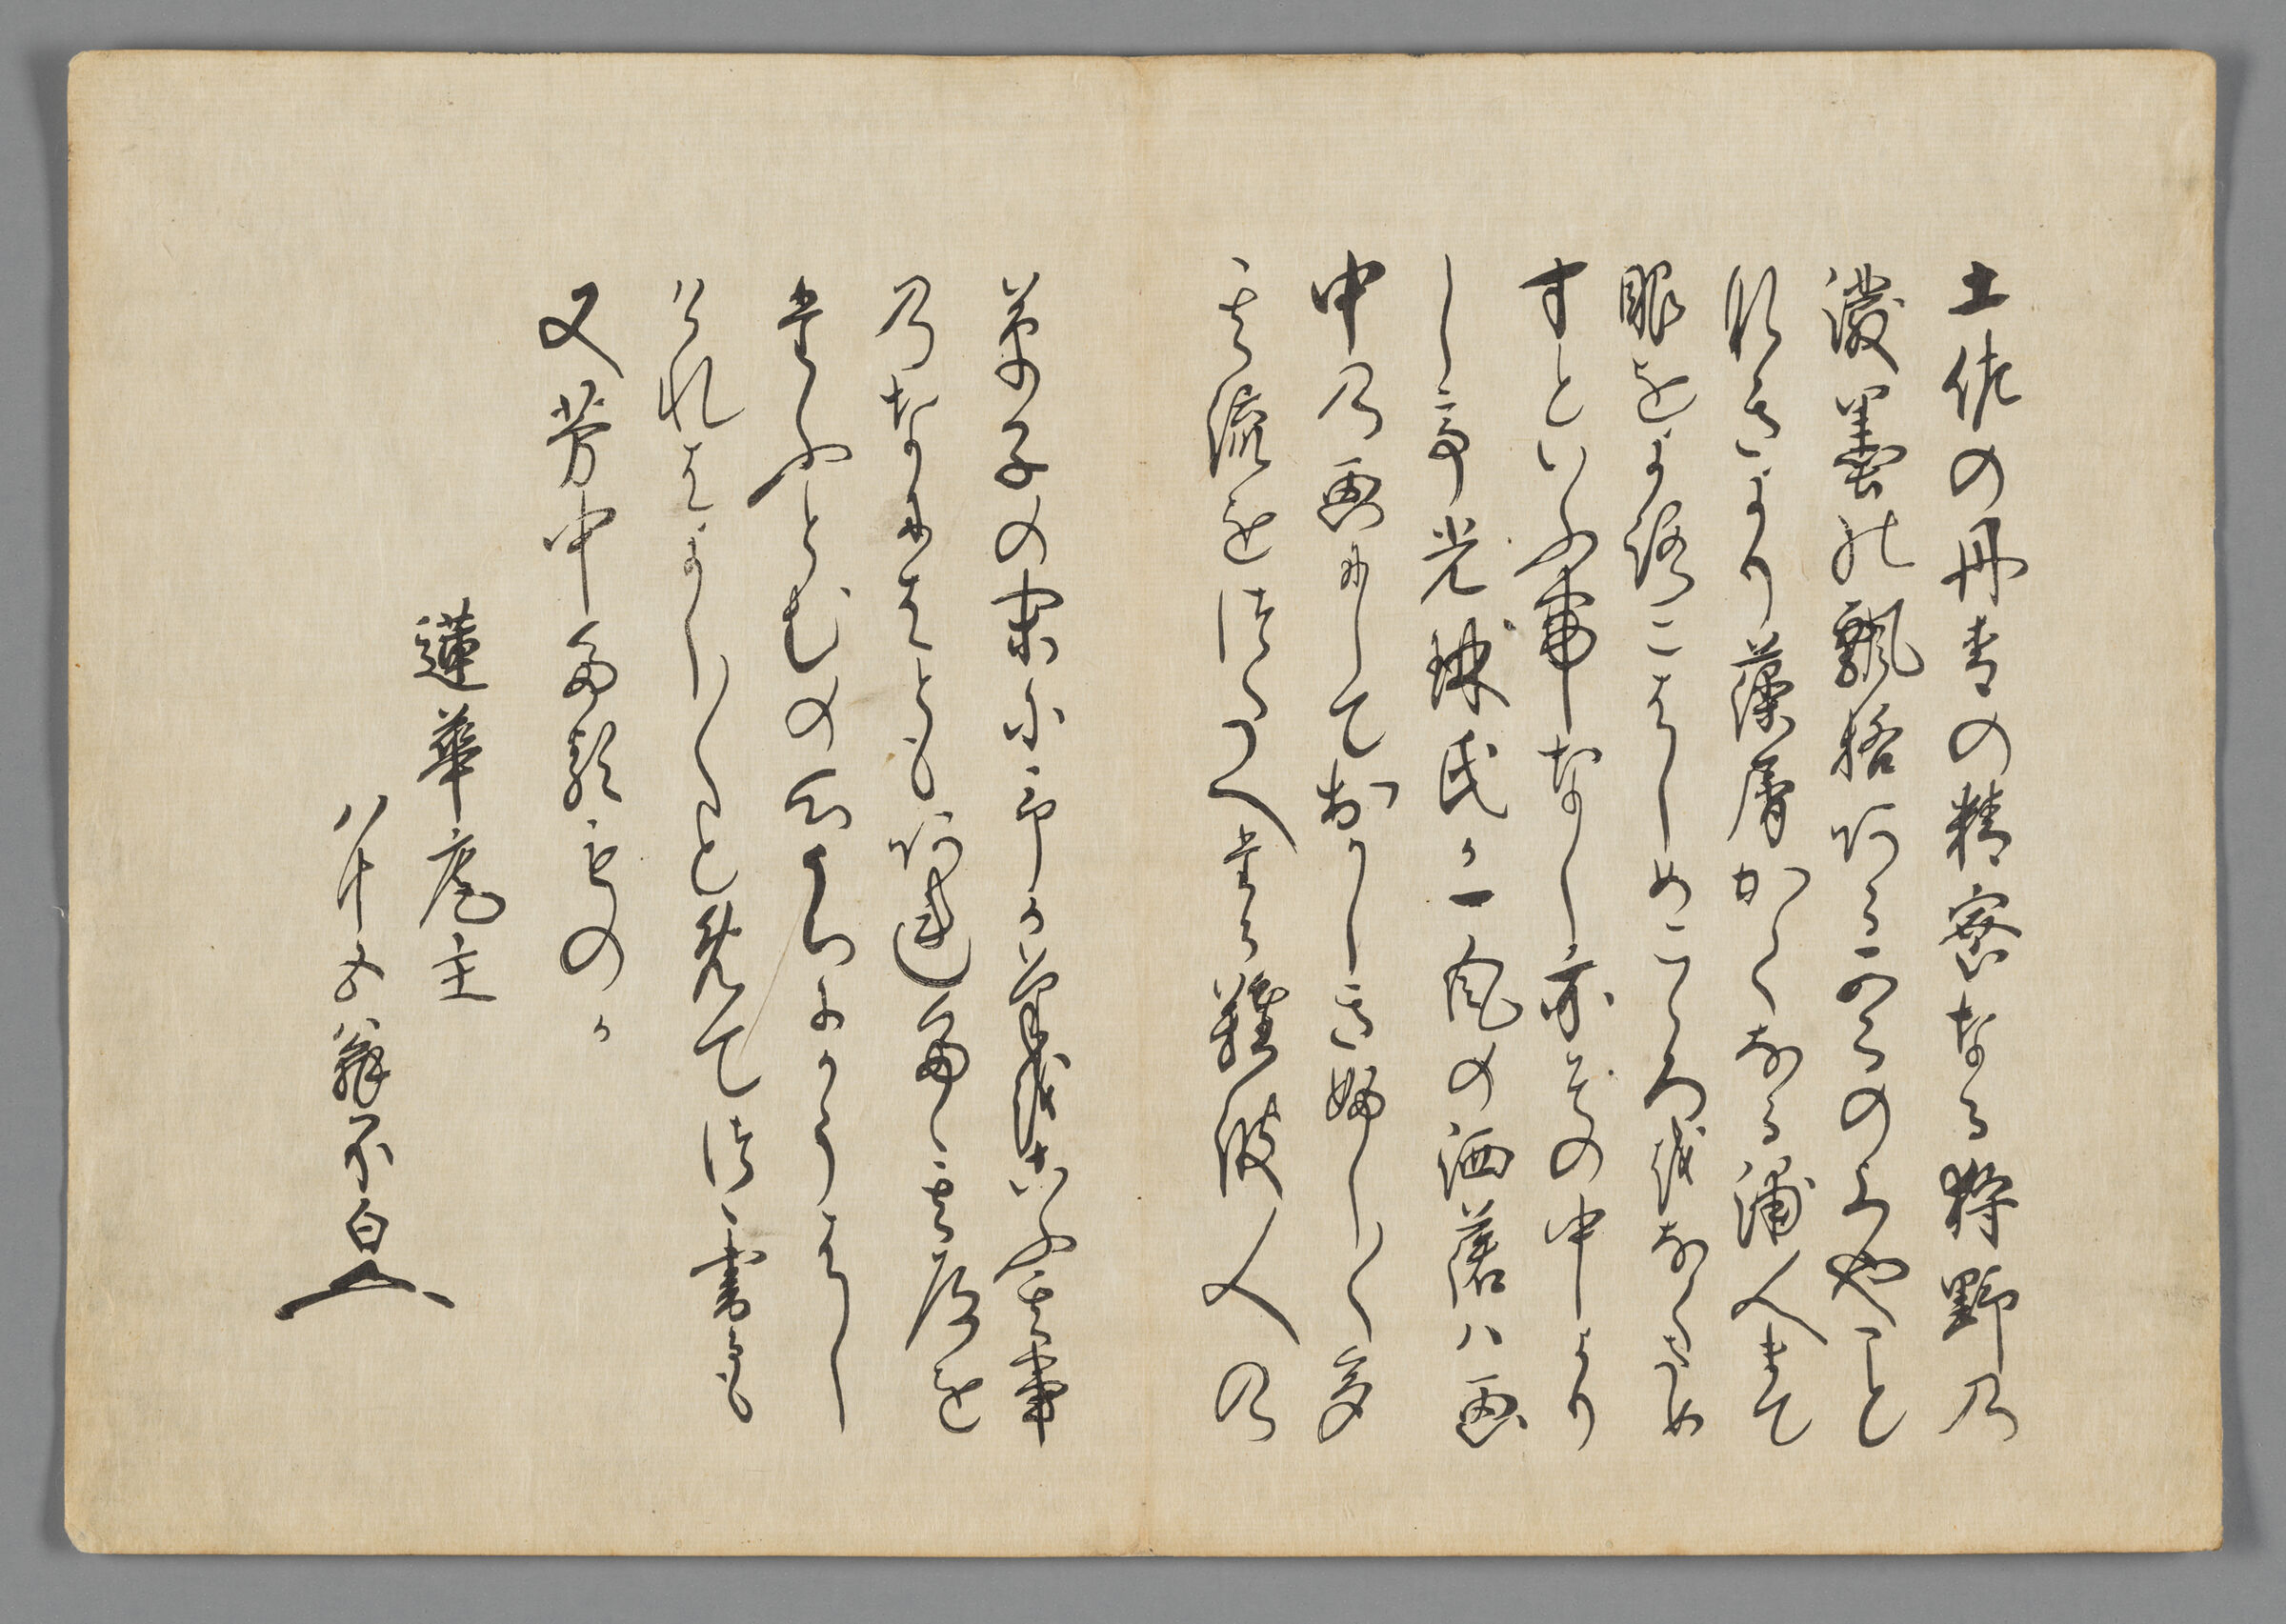 Colophon From The Kōrin Gafu (Kōrin Picture Album)